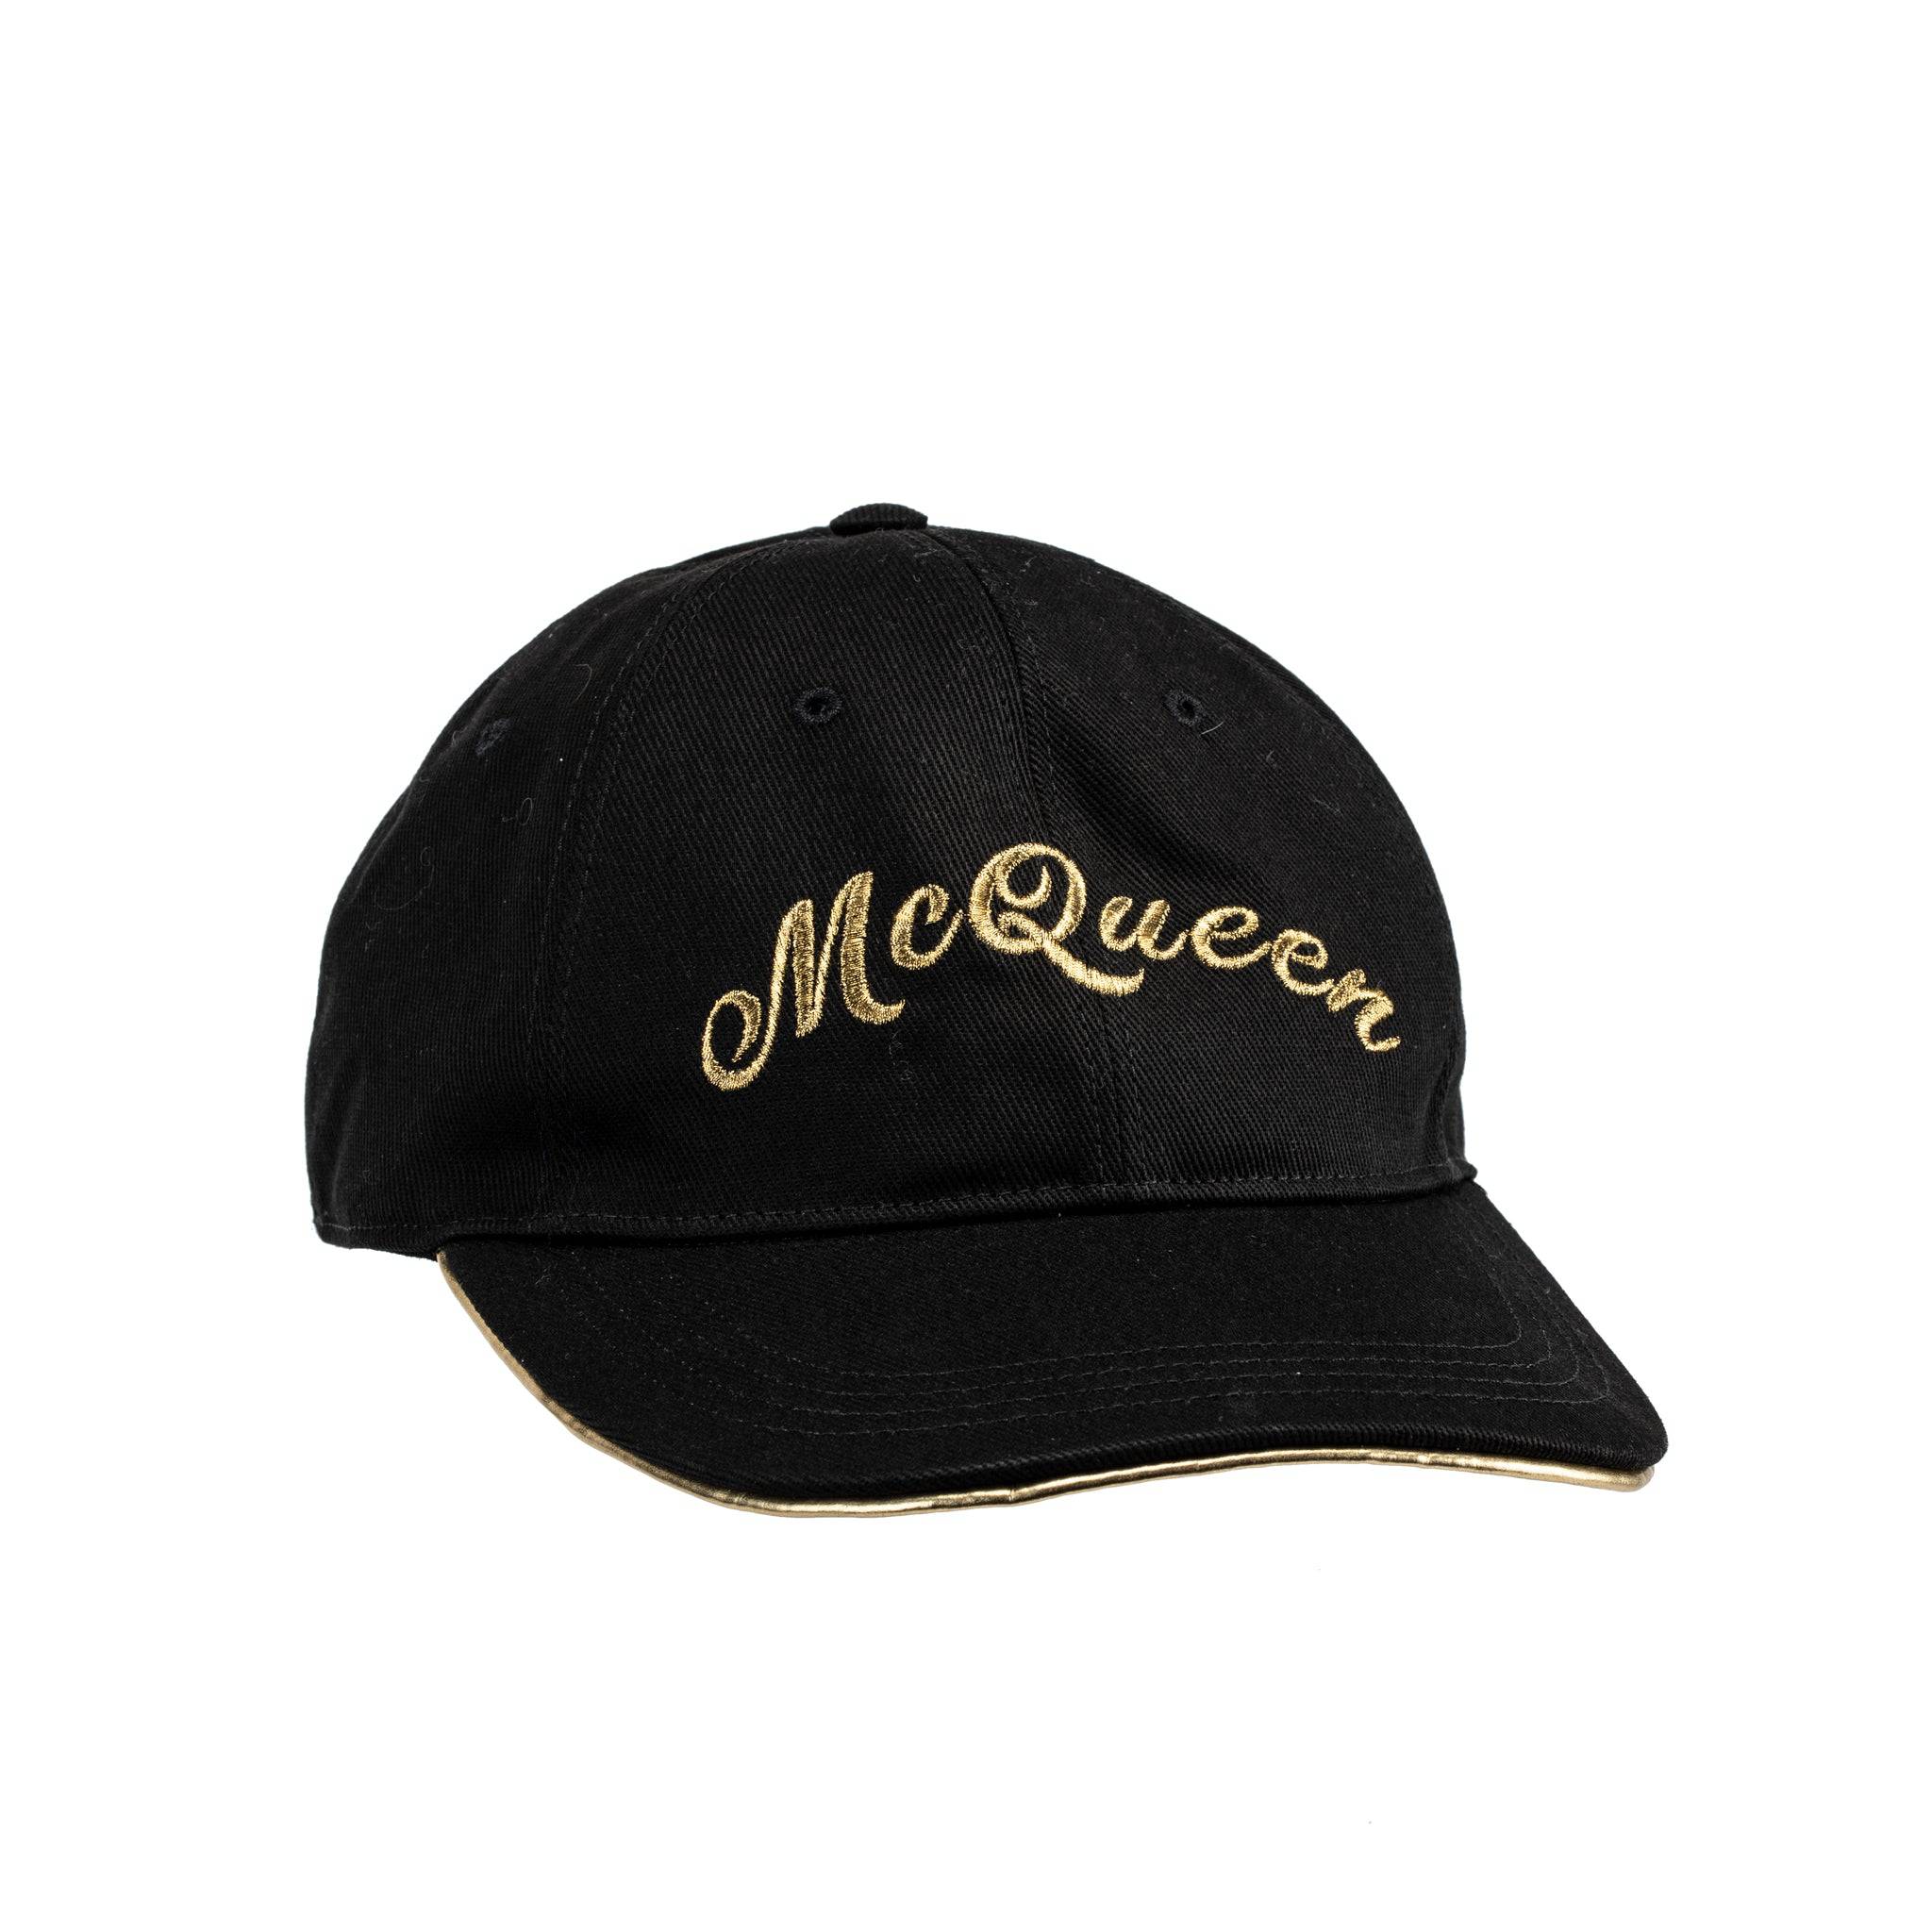 ALEXANDER MCQUEEN EMBROIDERED CAP BLACK AND GOLD - On Repeat